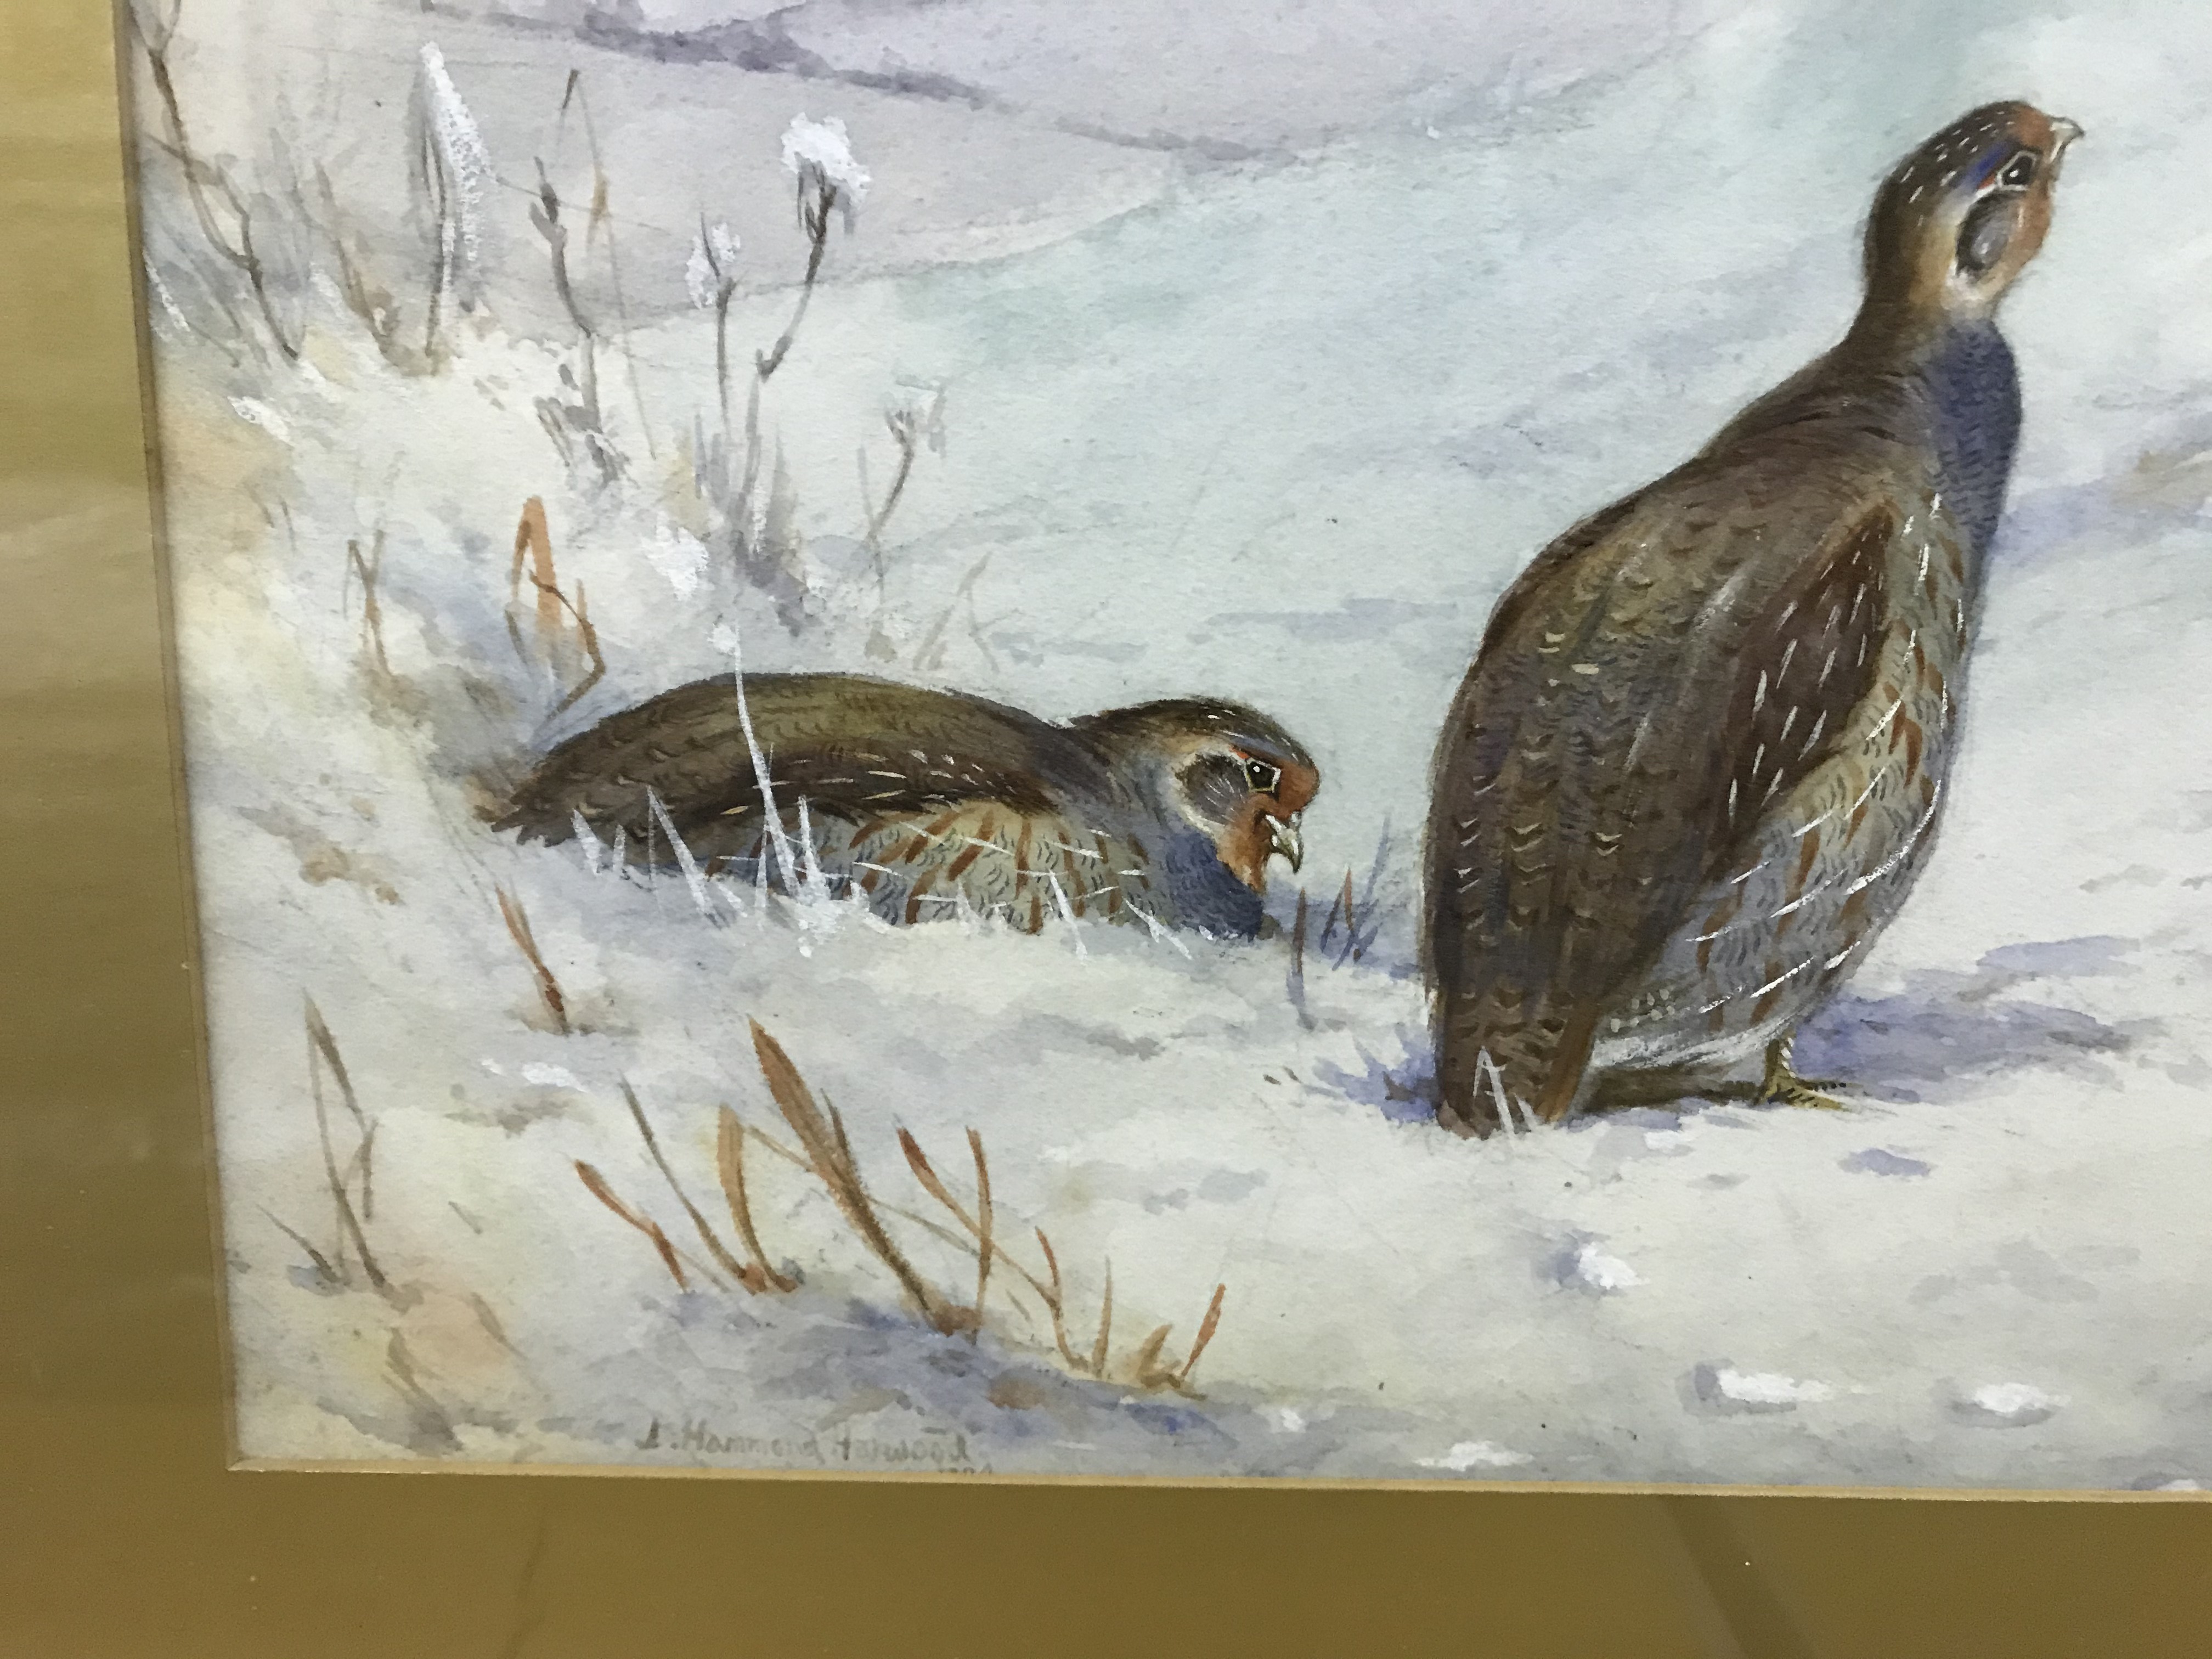 J HAMMOND HARWOOD "English Grey Legged Partridge in Snow", watercolour heightened with white, - Image 10 of 18